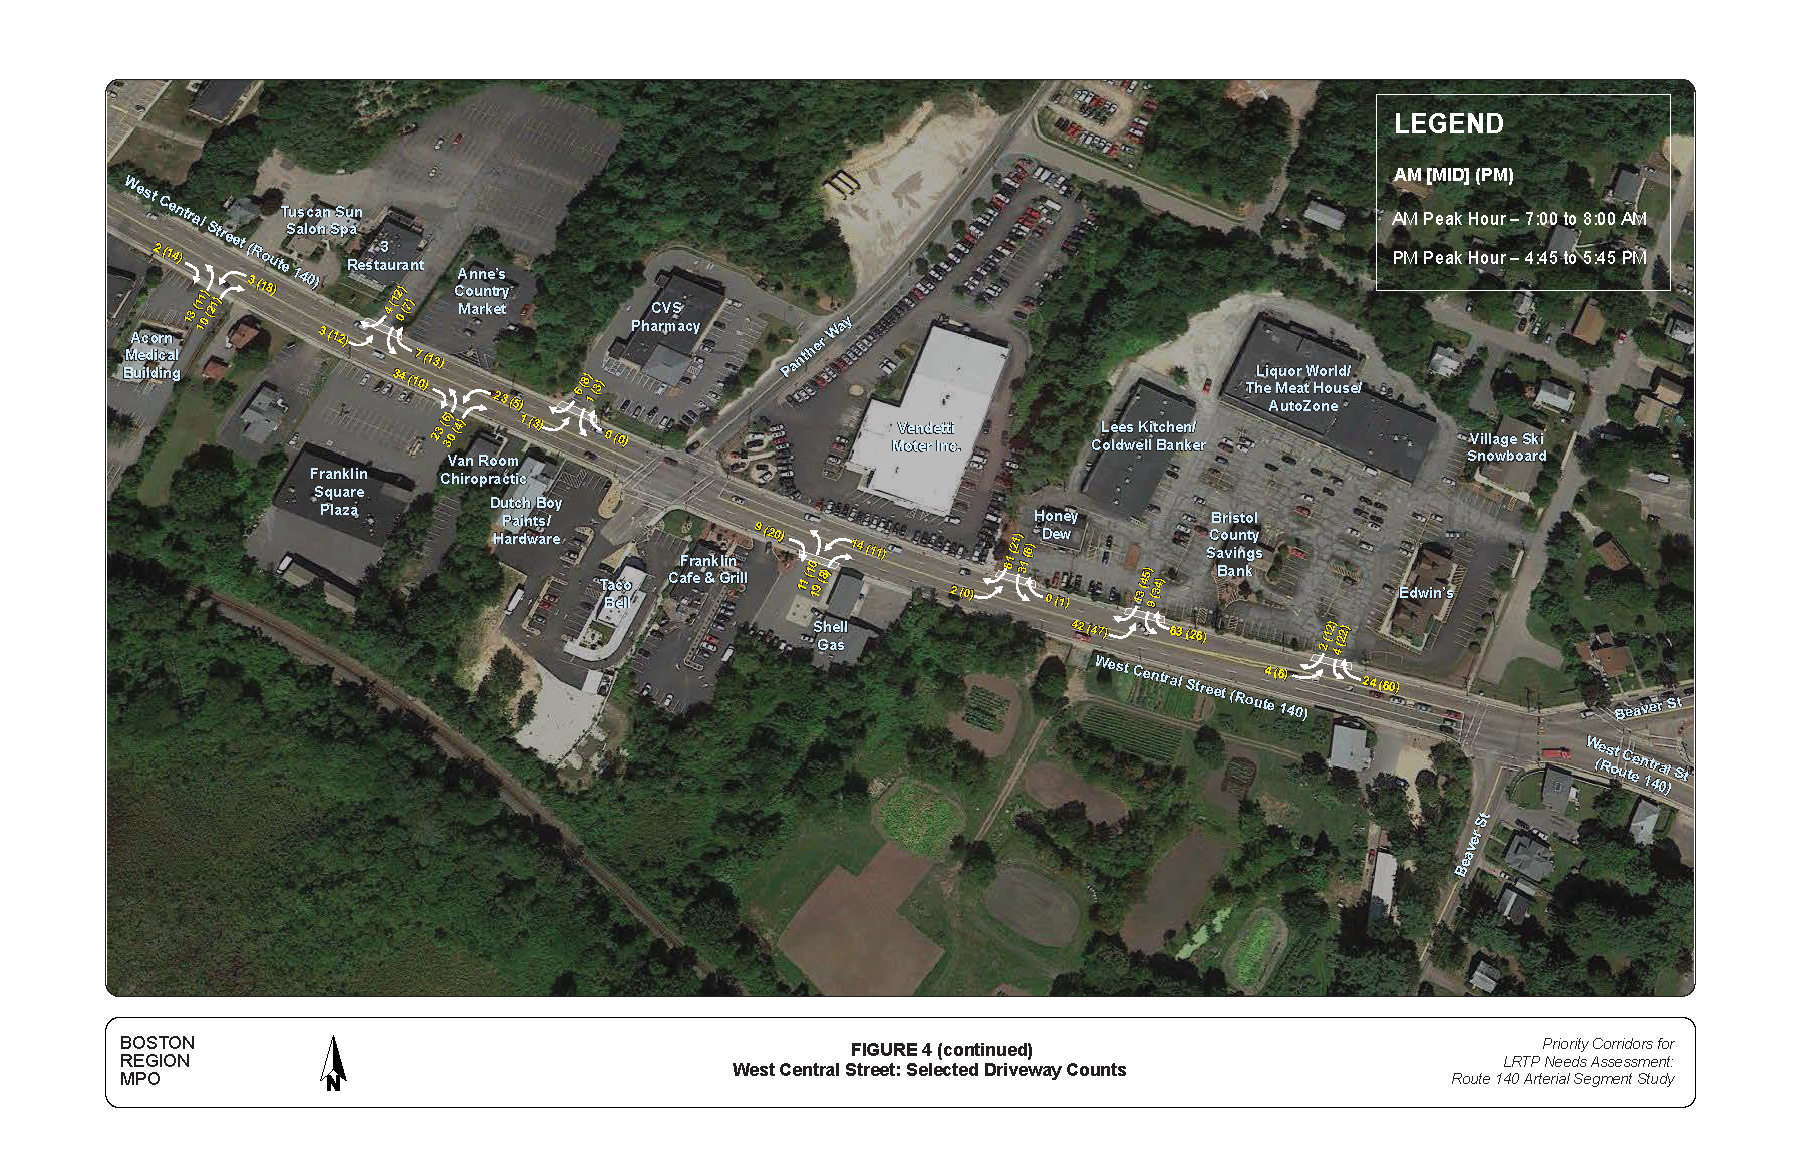 FIGURE 4 (continued): West Central Street: Selected Driveway Counts. Aerial-view map that indicates existing peak-hour turning movement volumes for the driveways on West Central Street.